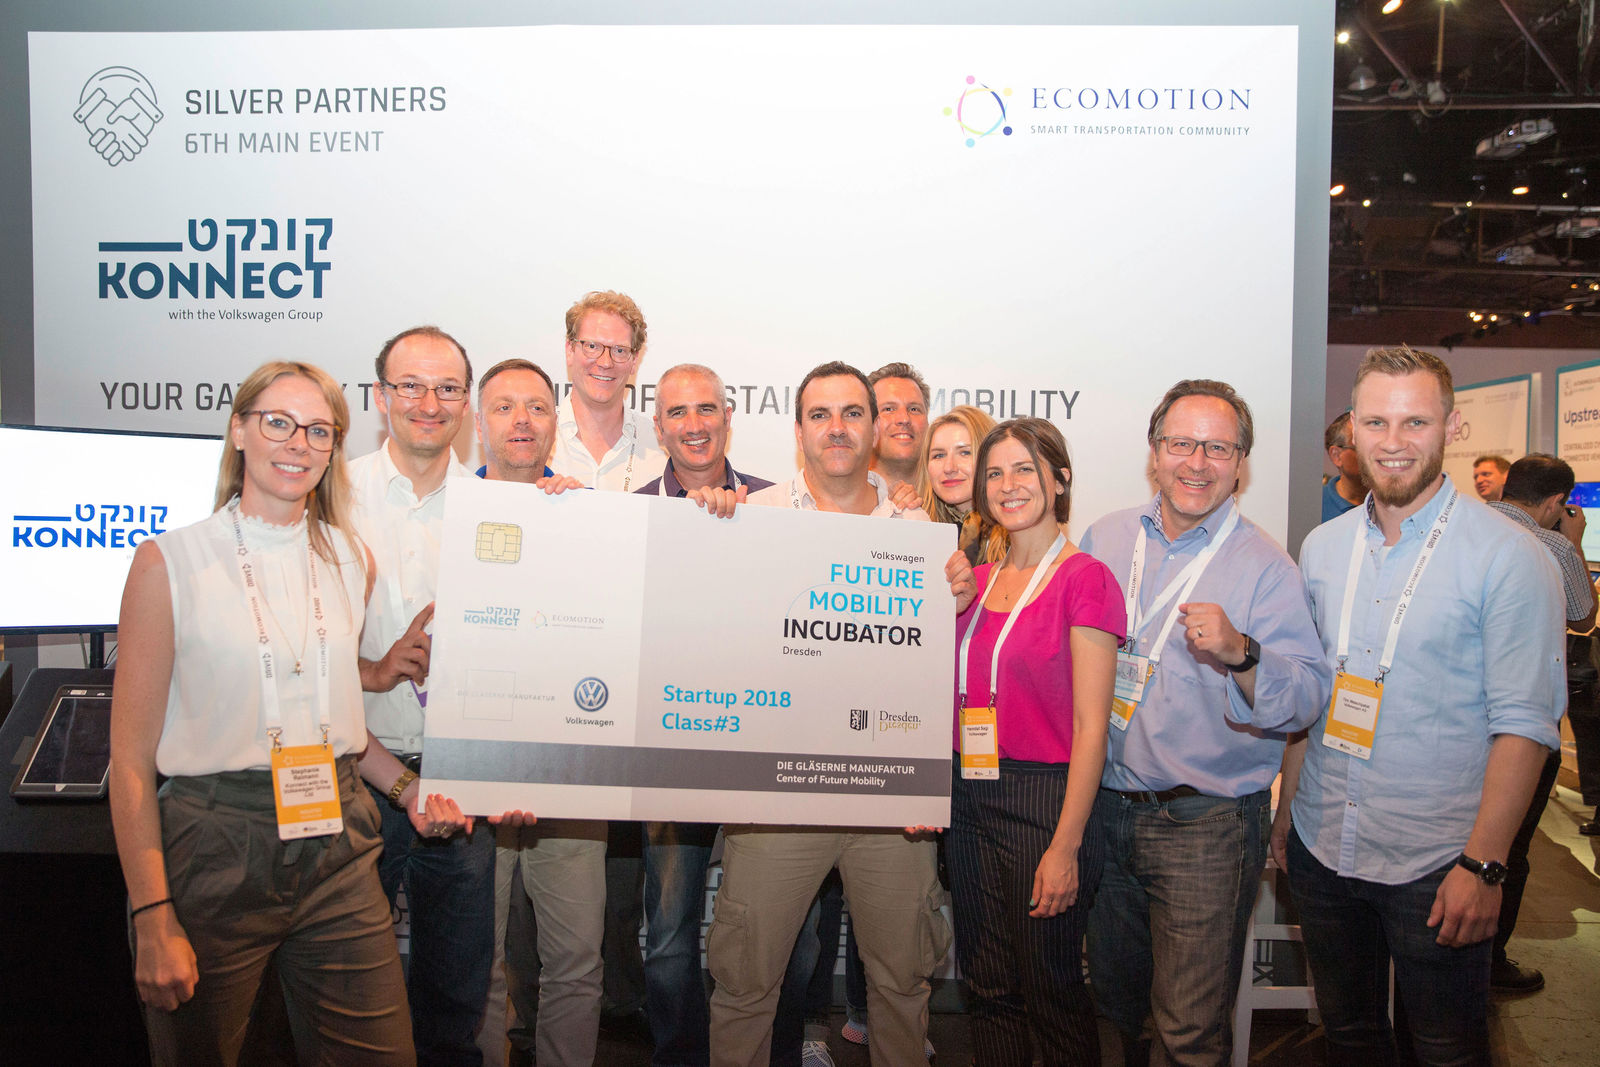 Successful competition in Tel Aviv: The Israeli startup "Make my day" will be moving to the "Future Mobility Incubator" of the Transparent Factory Dresden in September - here with the jury of mobility experts.